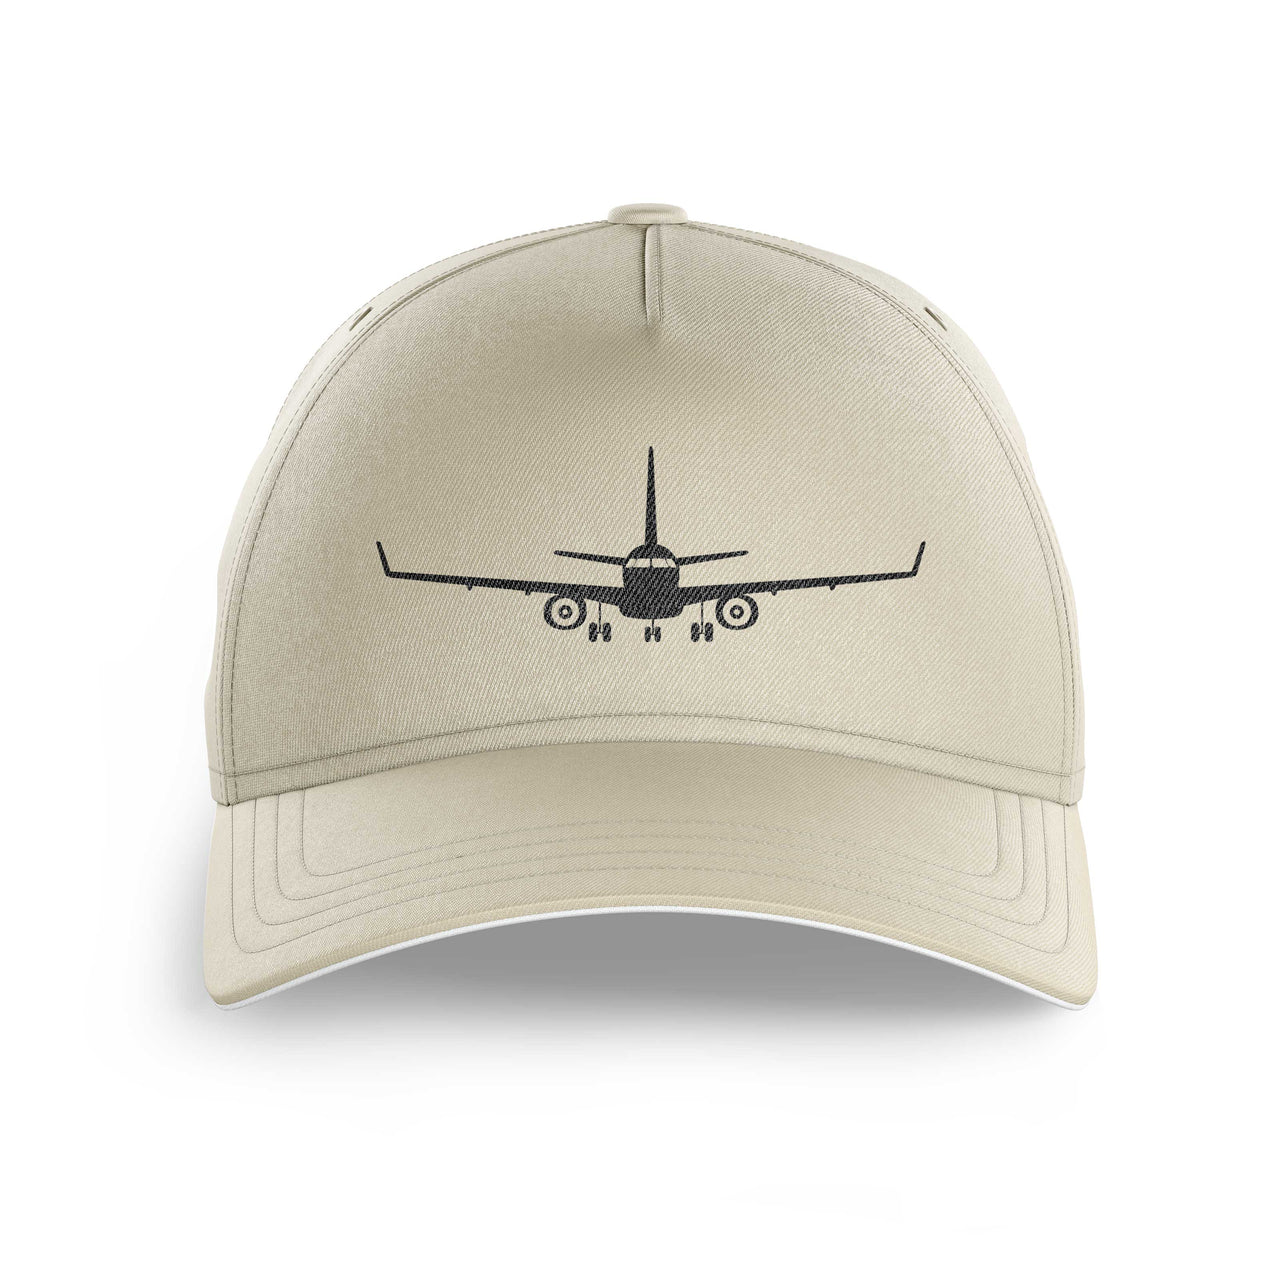 Embraer E-190 Silhouette Printed Hats